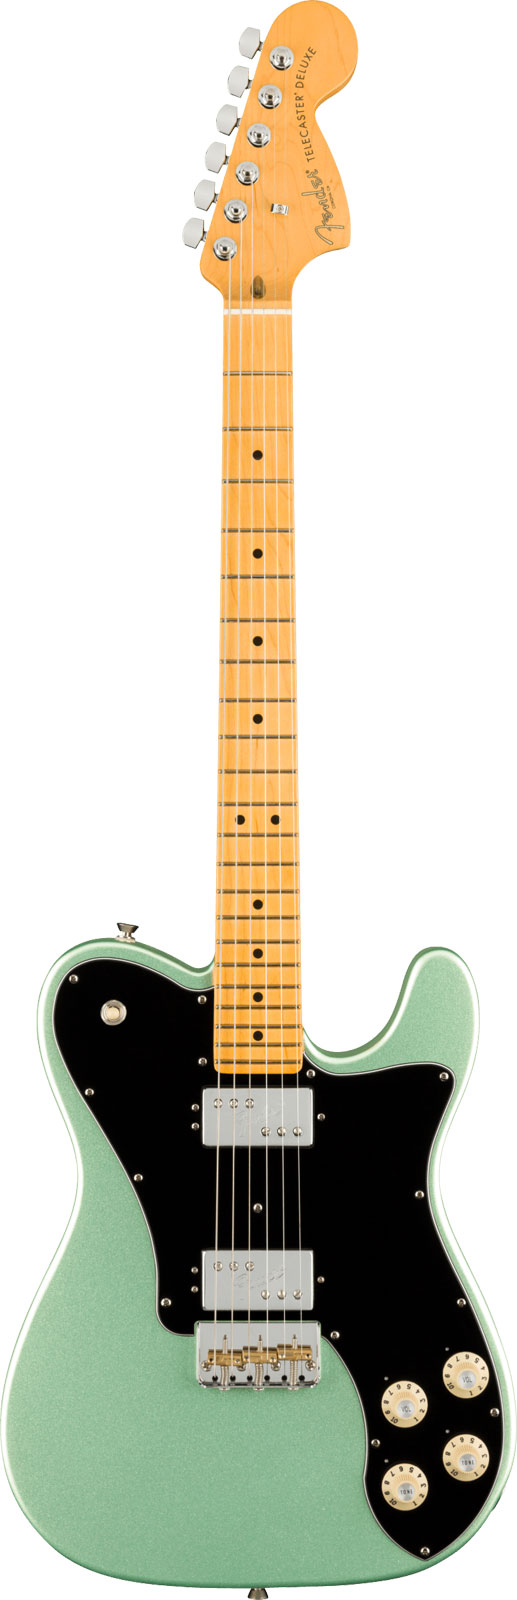 FENDER AMERICAN PROFESSIONAL II TELECASTER DELUXE MN, MYSTIC SURF GREEN